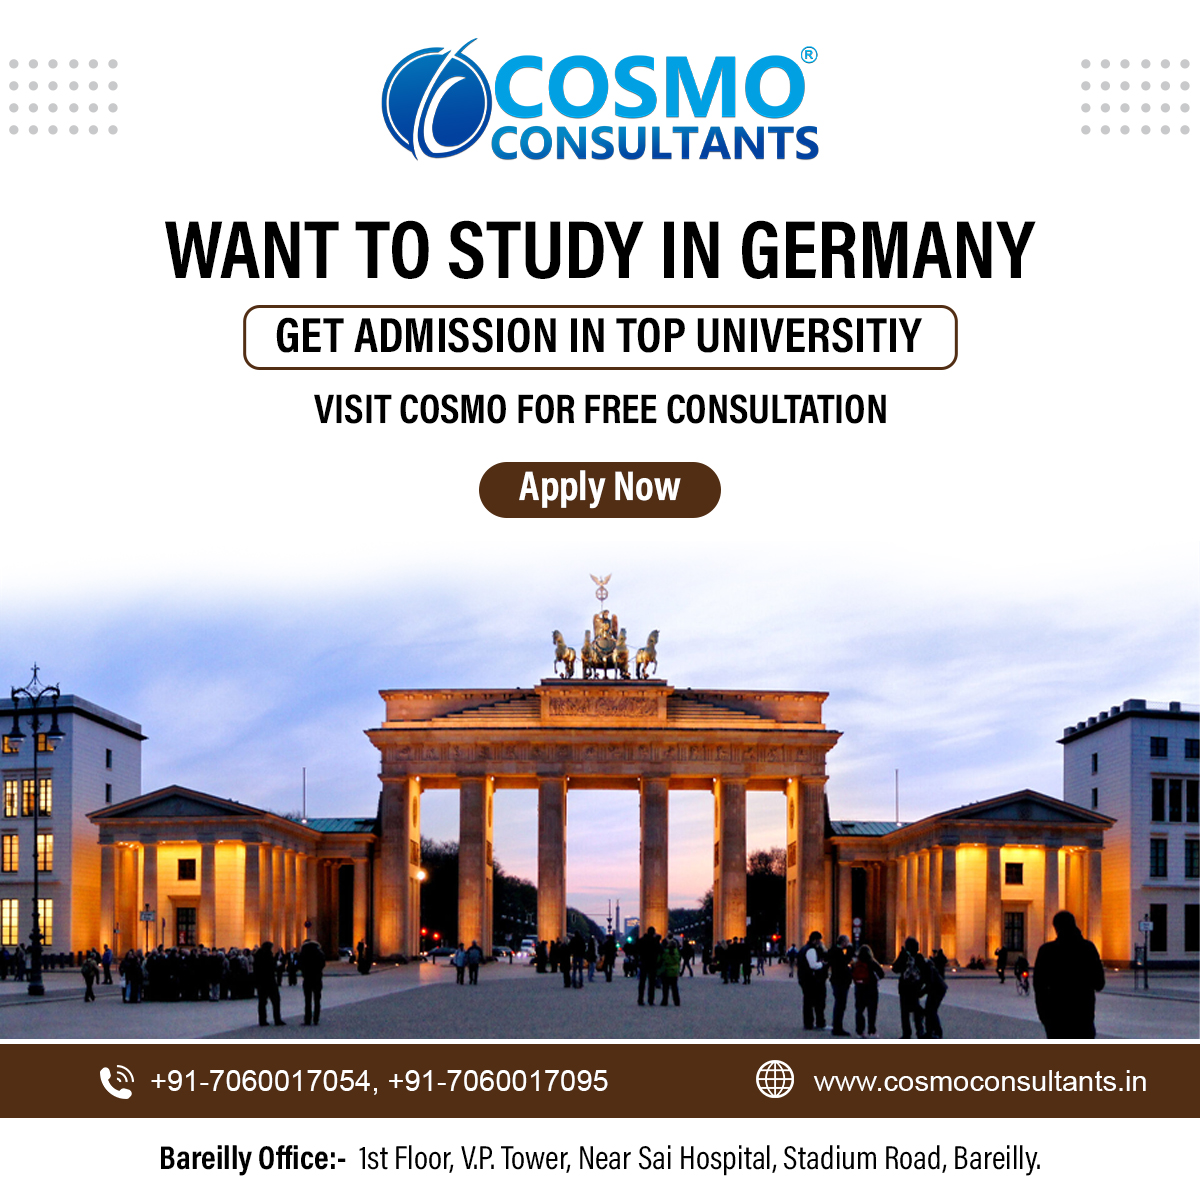 Want to Study in Germany.
Here are top Universities in Germany for International Students bit.ly/3JfaCY1

For more information reach us: +91-7060017054, +91-7060017095.

#CosmoConsultants #Germany #StudyInGermany #StudyAbroad #studentvisa #studyvisa #overseaseducation